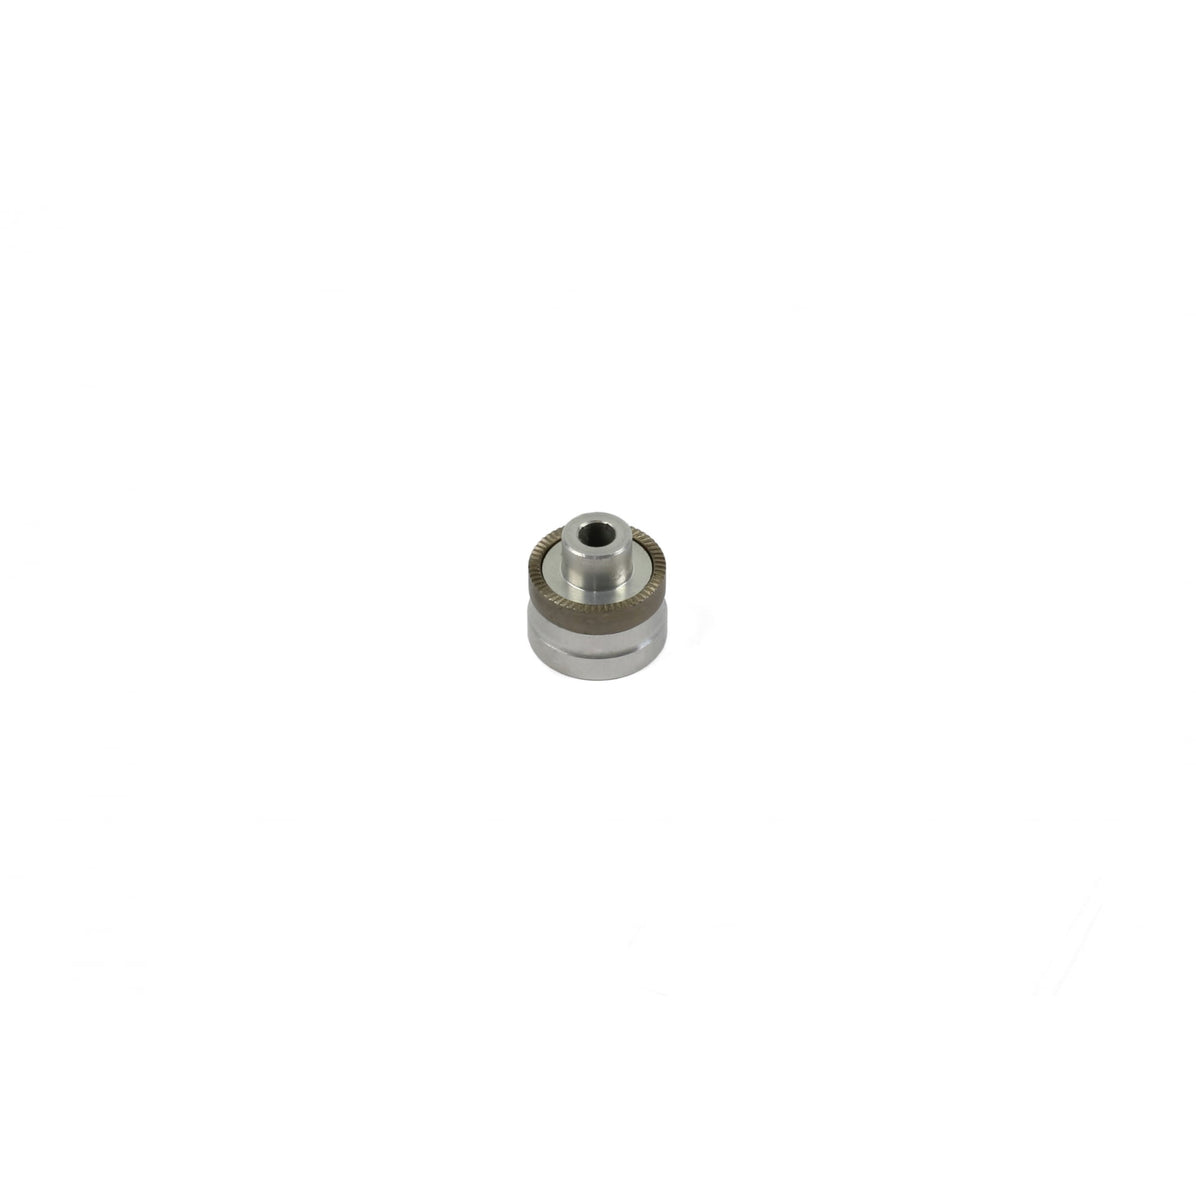 Hope Pro 2 SS/Tr Nrb Drive-Side QR Spacer - Silver